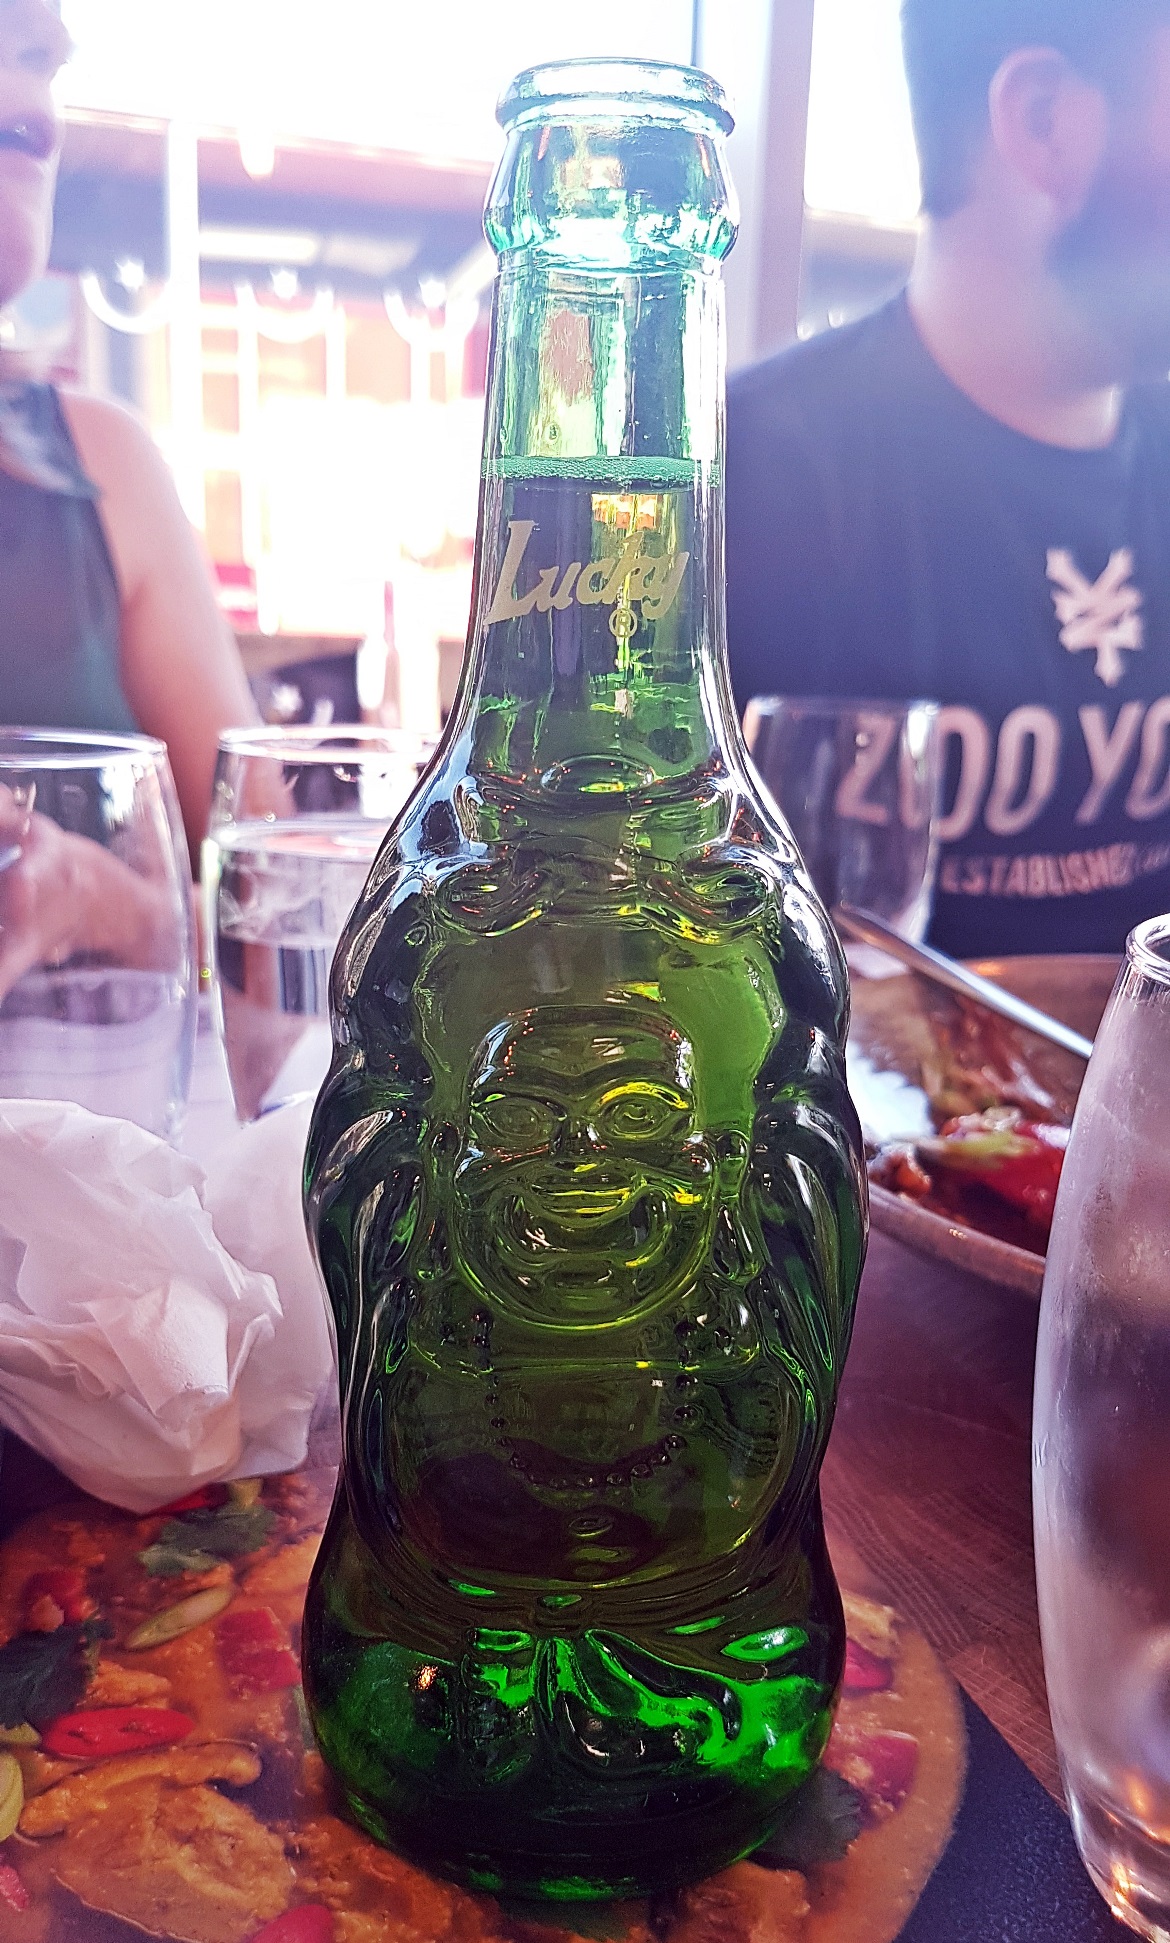 Lucky Buddha beer - Wagamama Menu Pairing, Review by BeckyBecky Blogs